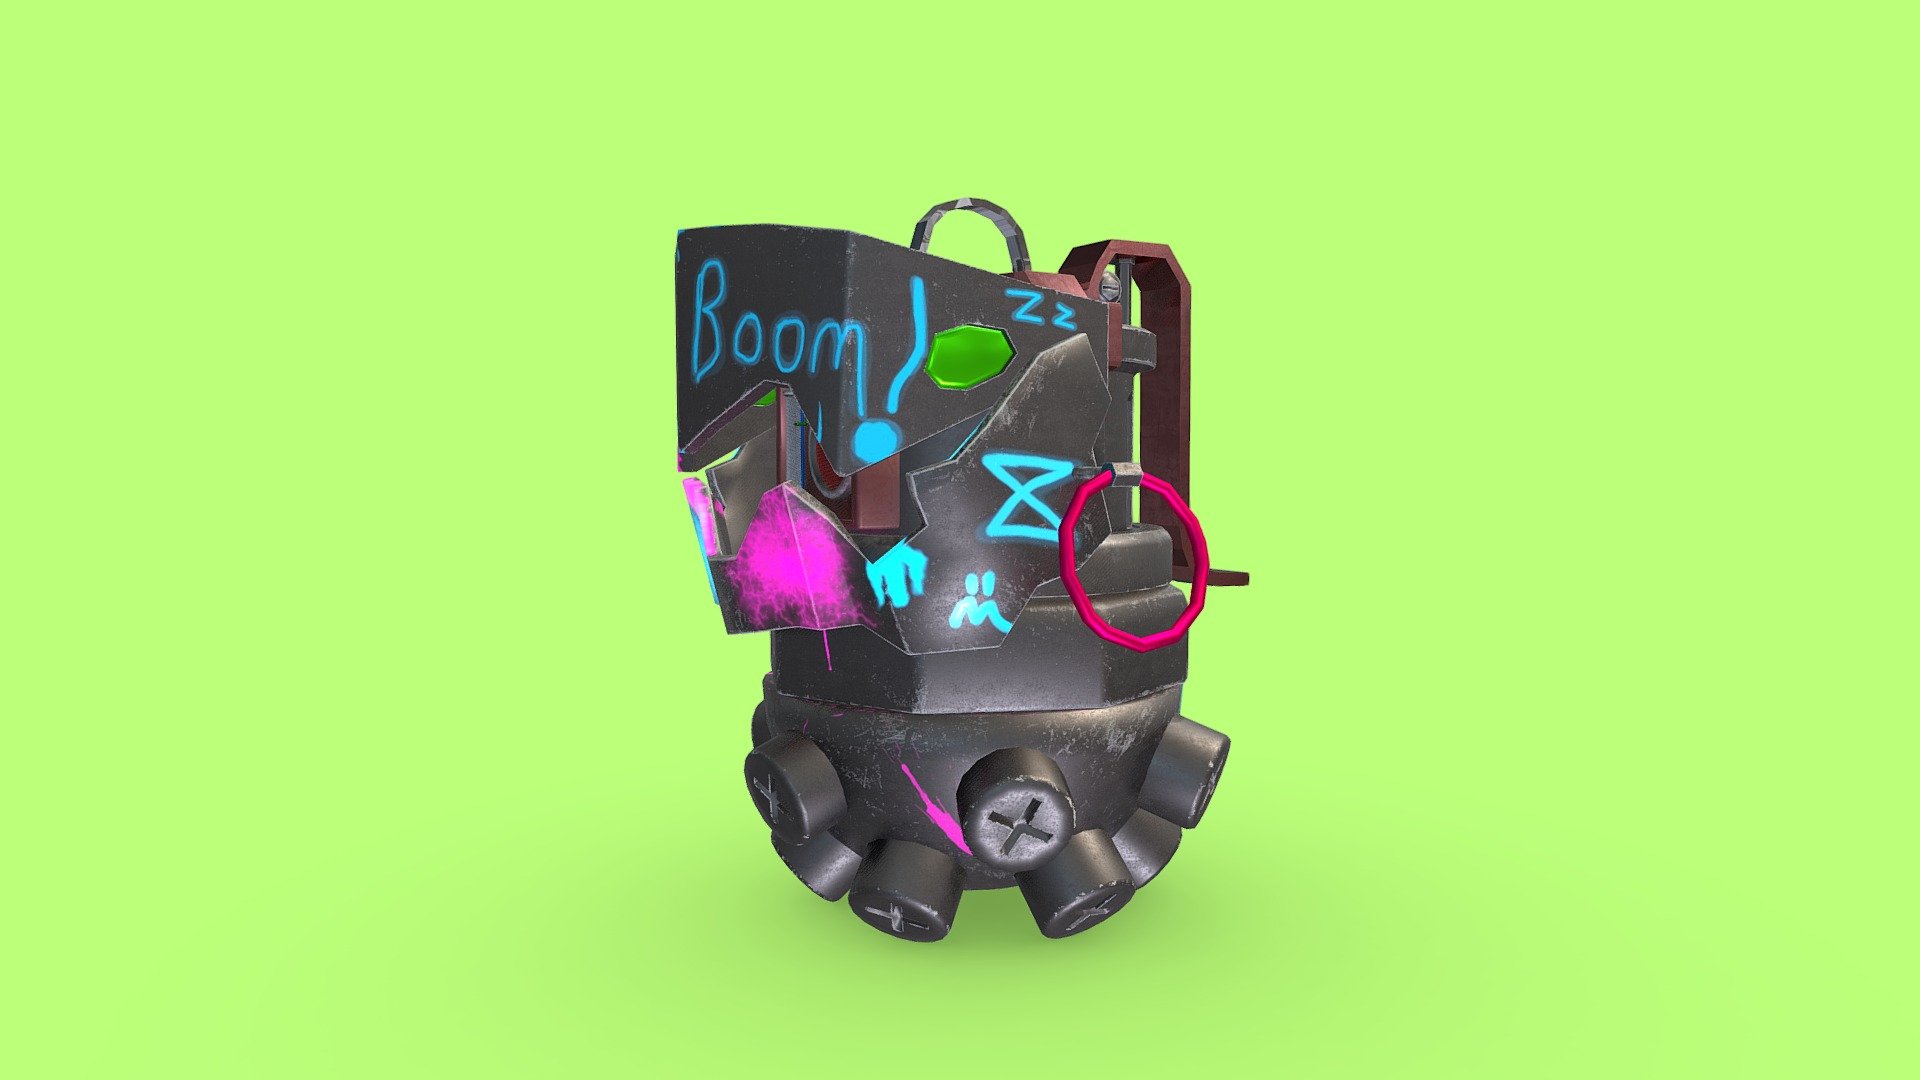 Today I modeled the bomb of my favorite game character for you. I had a lot of fun modeling and I was very proud. I hope you liked it 3d model